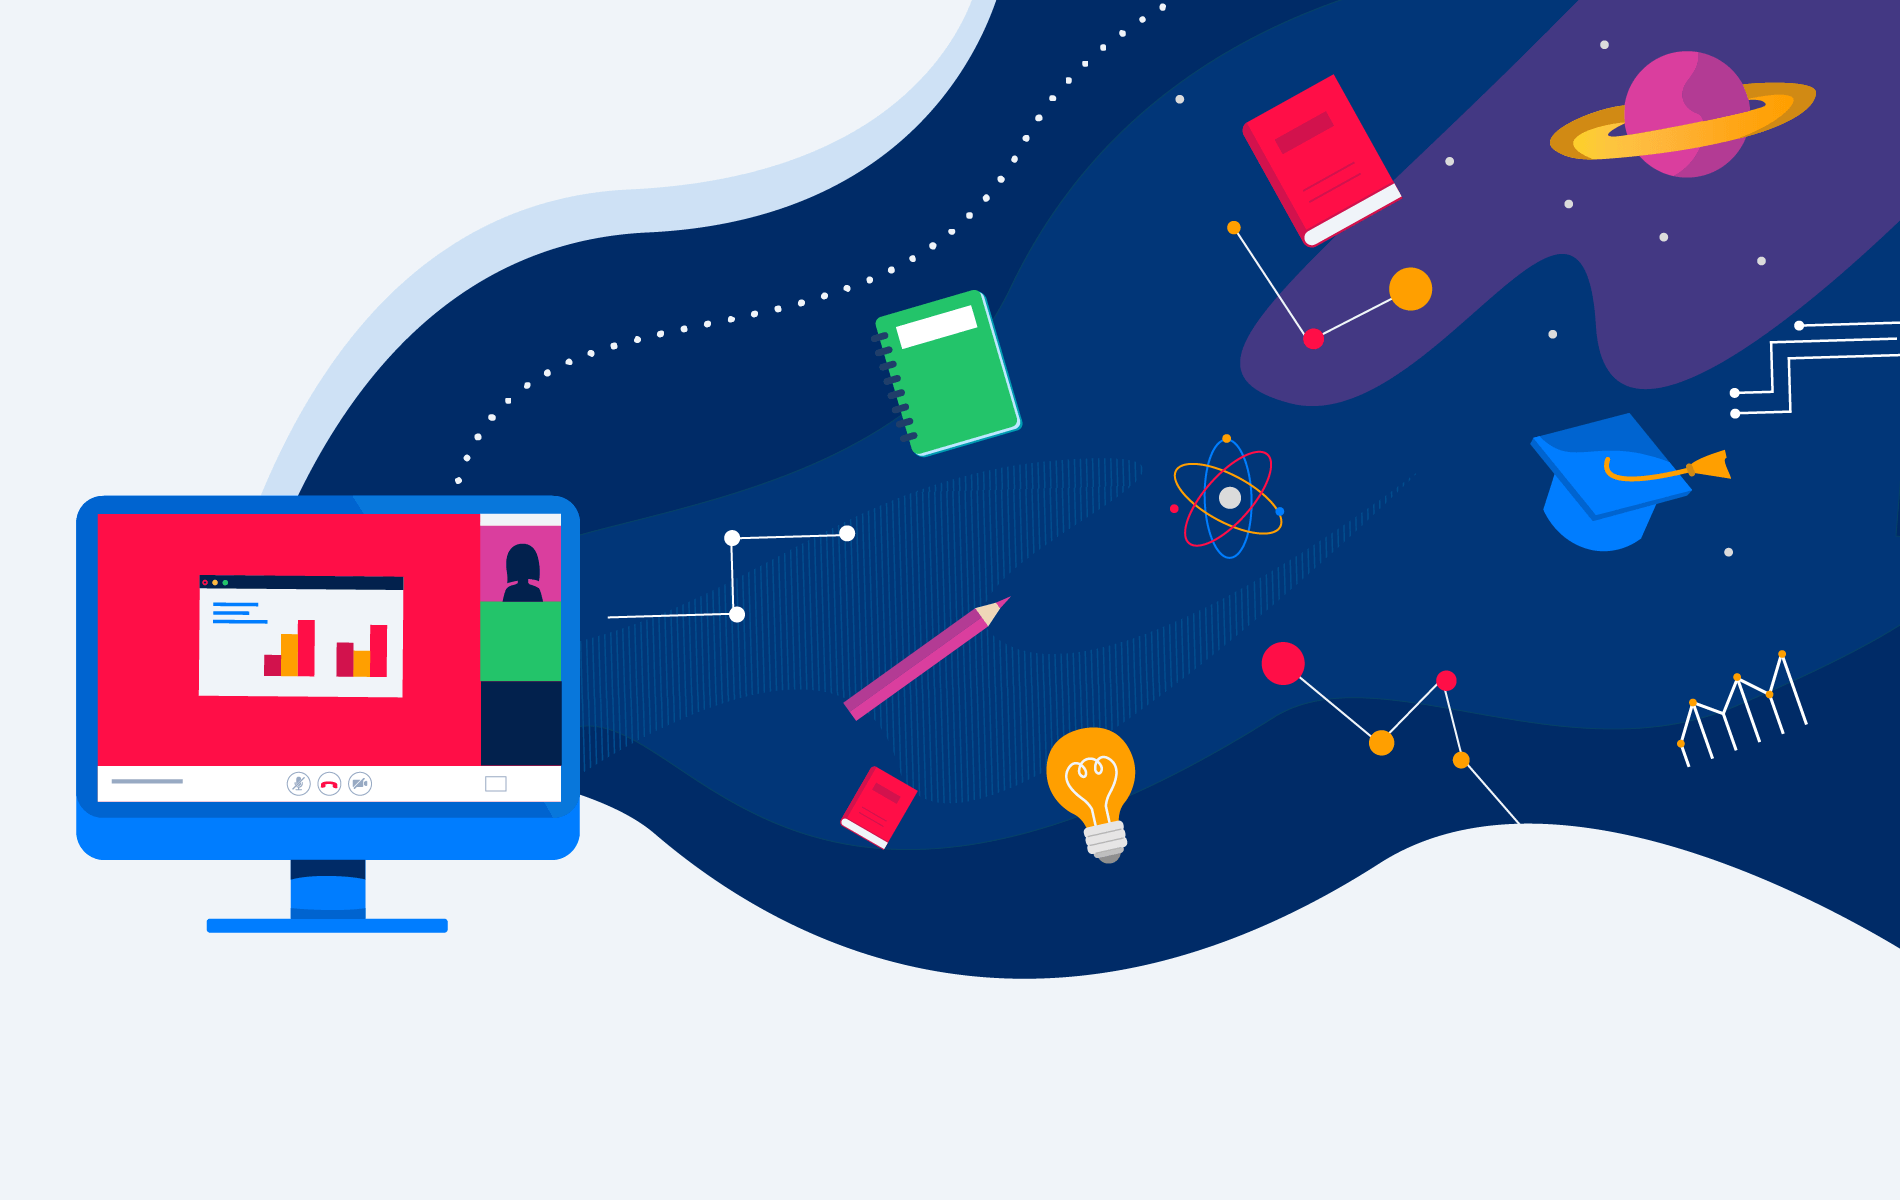 An abstract illustration of online learning